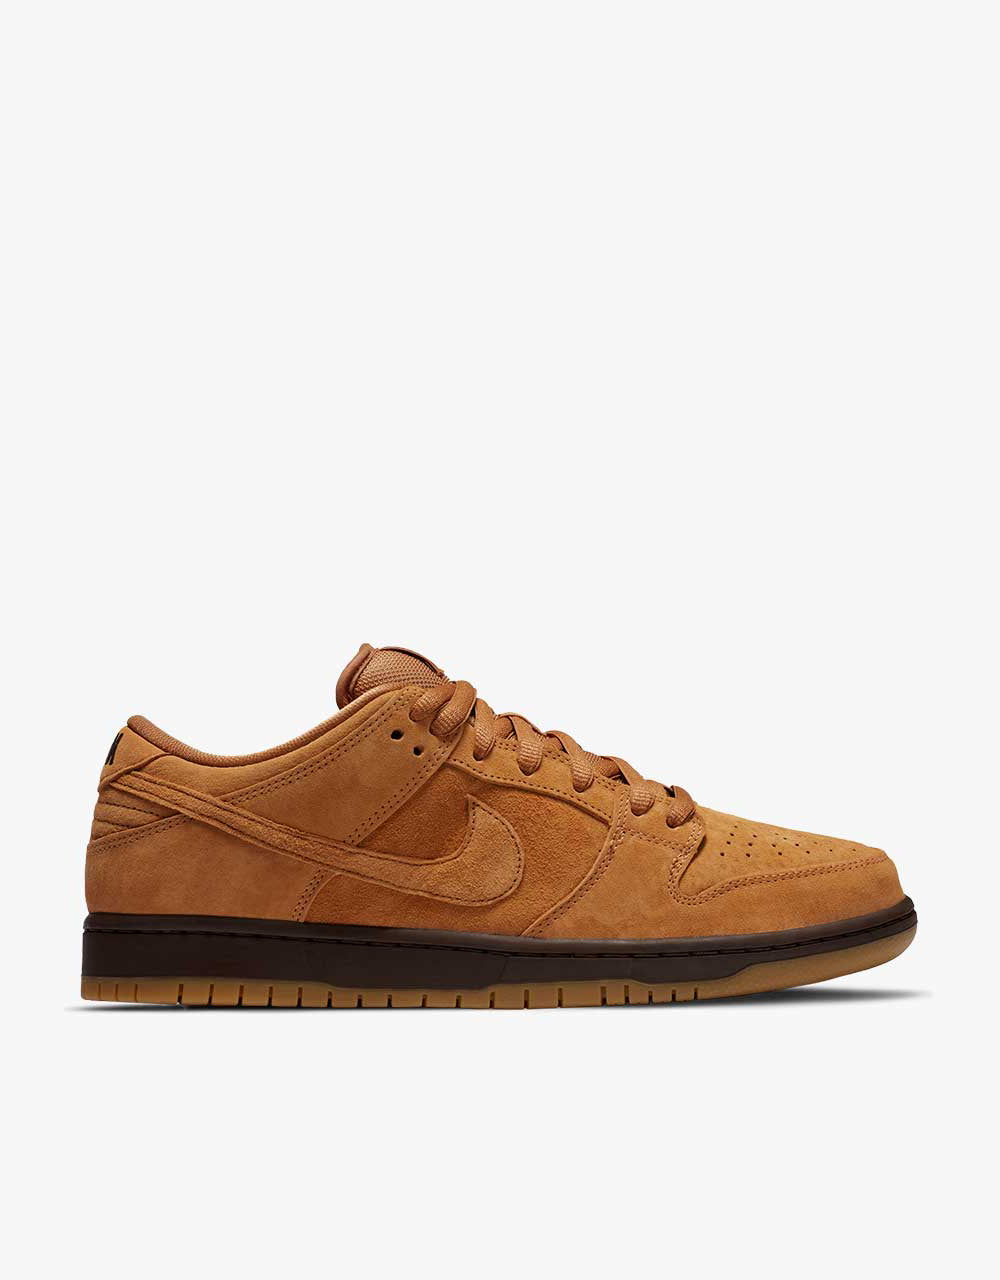 Nike SB Dunk Low Pro Skate Shoes - Flax/Flax-Flax-Baroque Brown – Route One